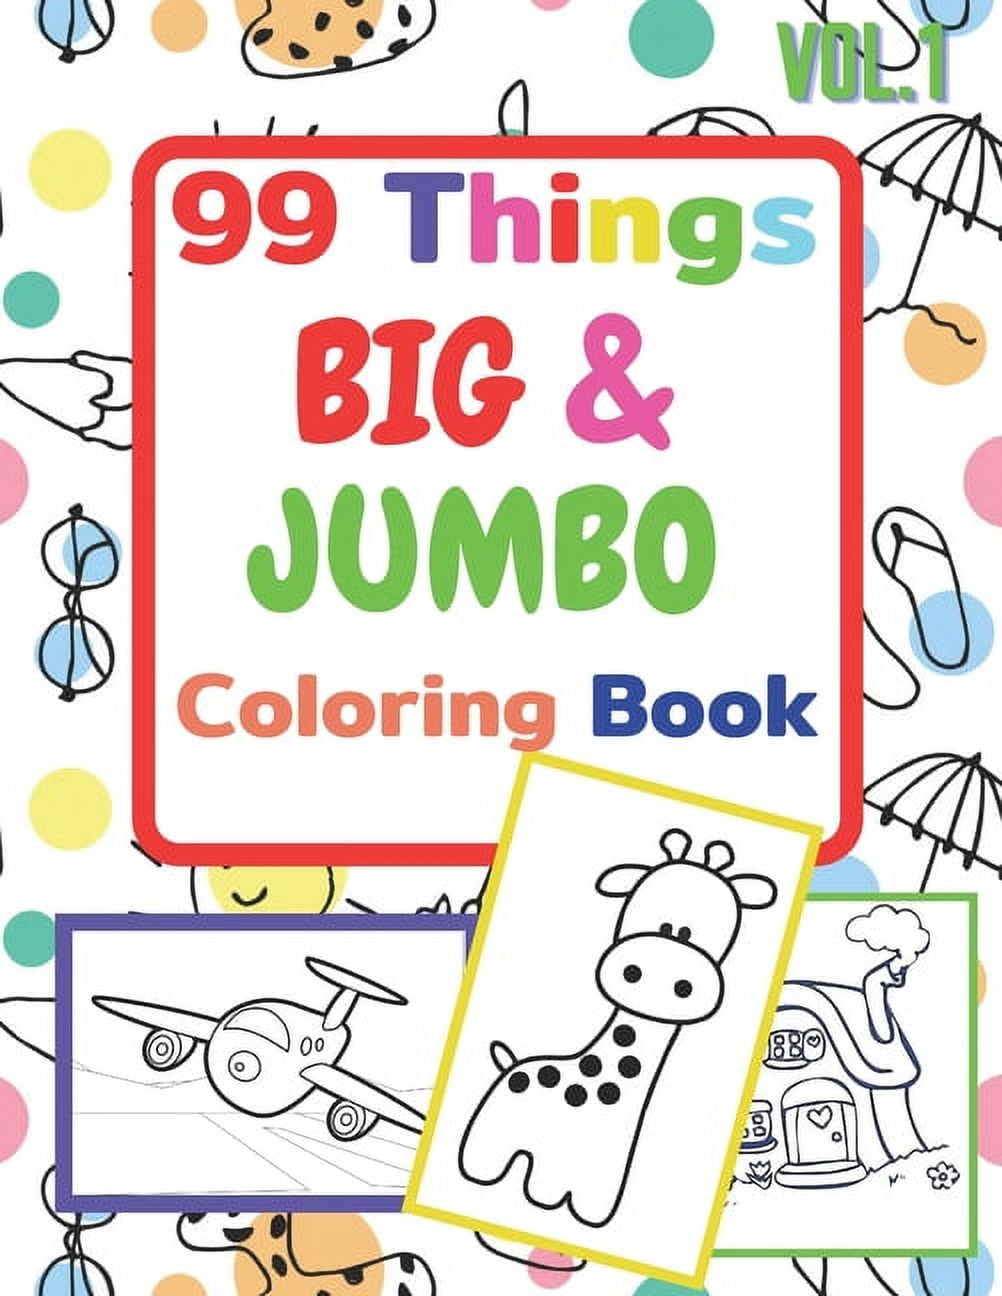 123 things BIG & JUMBO Coloring Book: 123 Pages to color!!, Easy